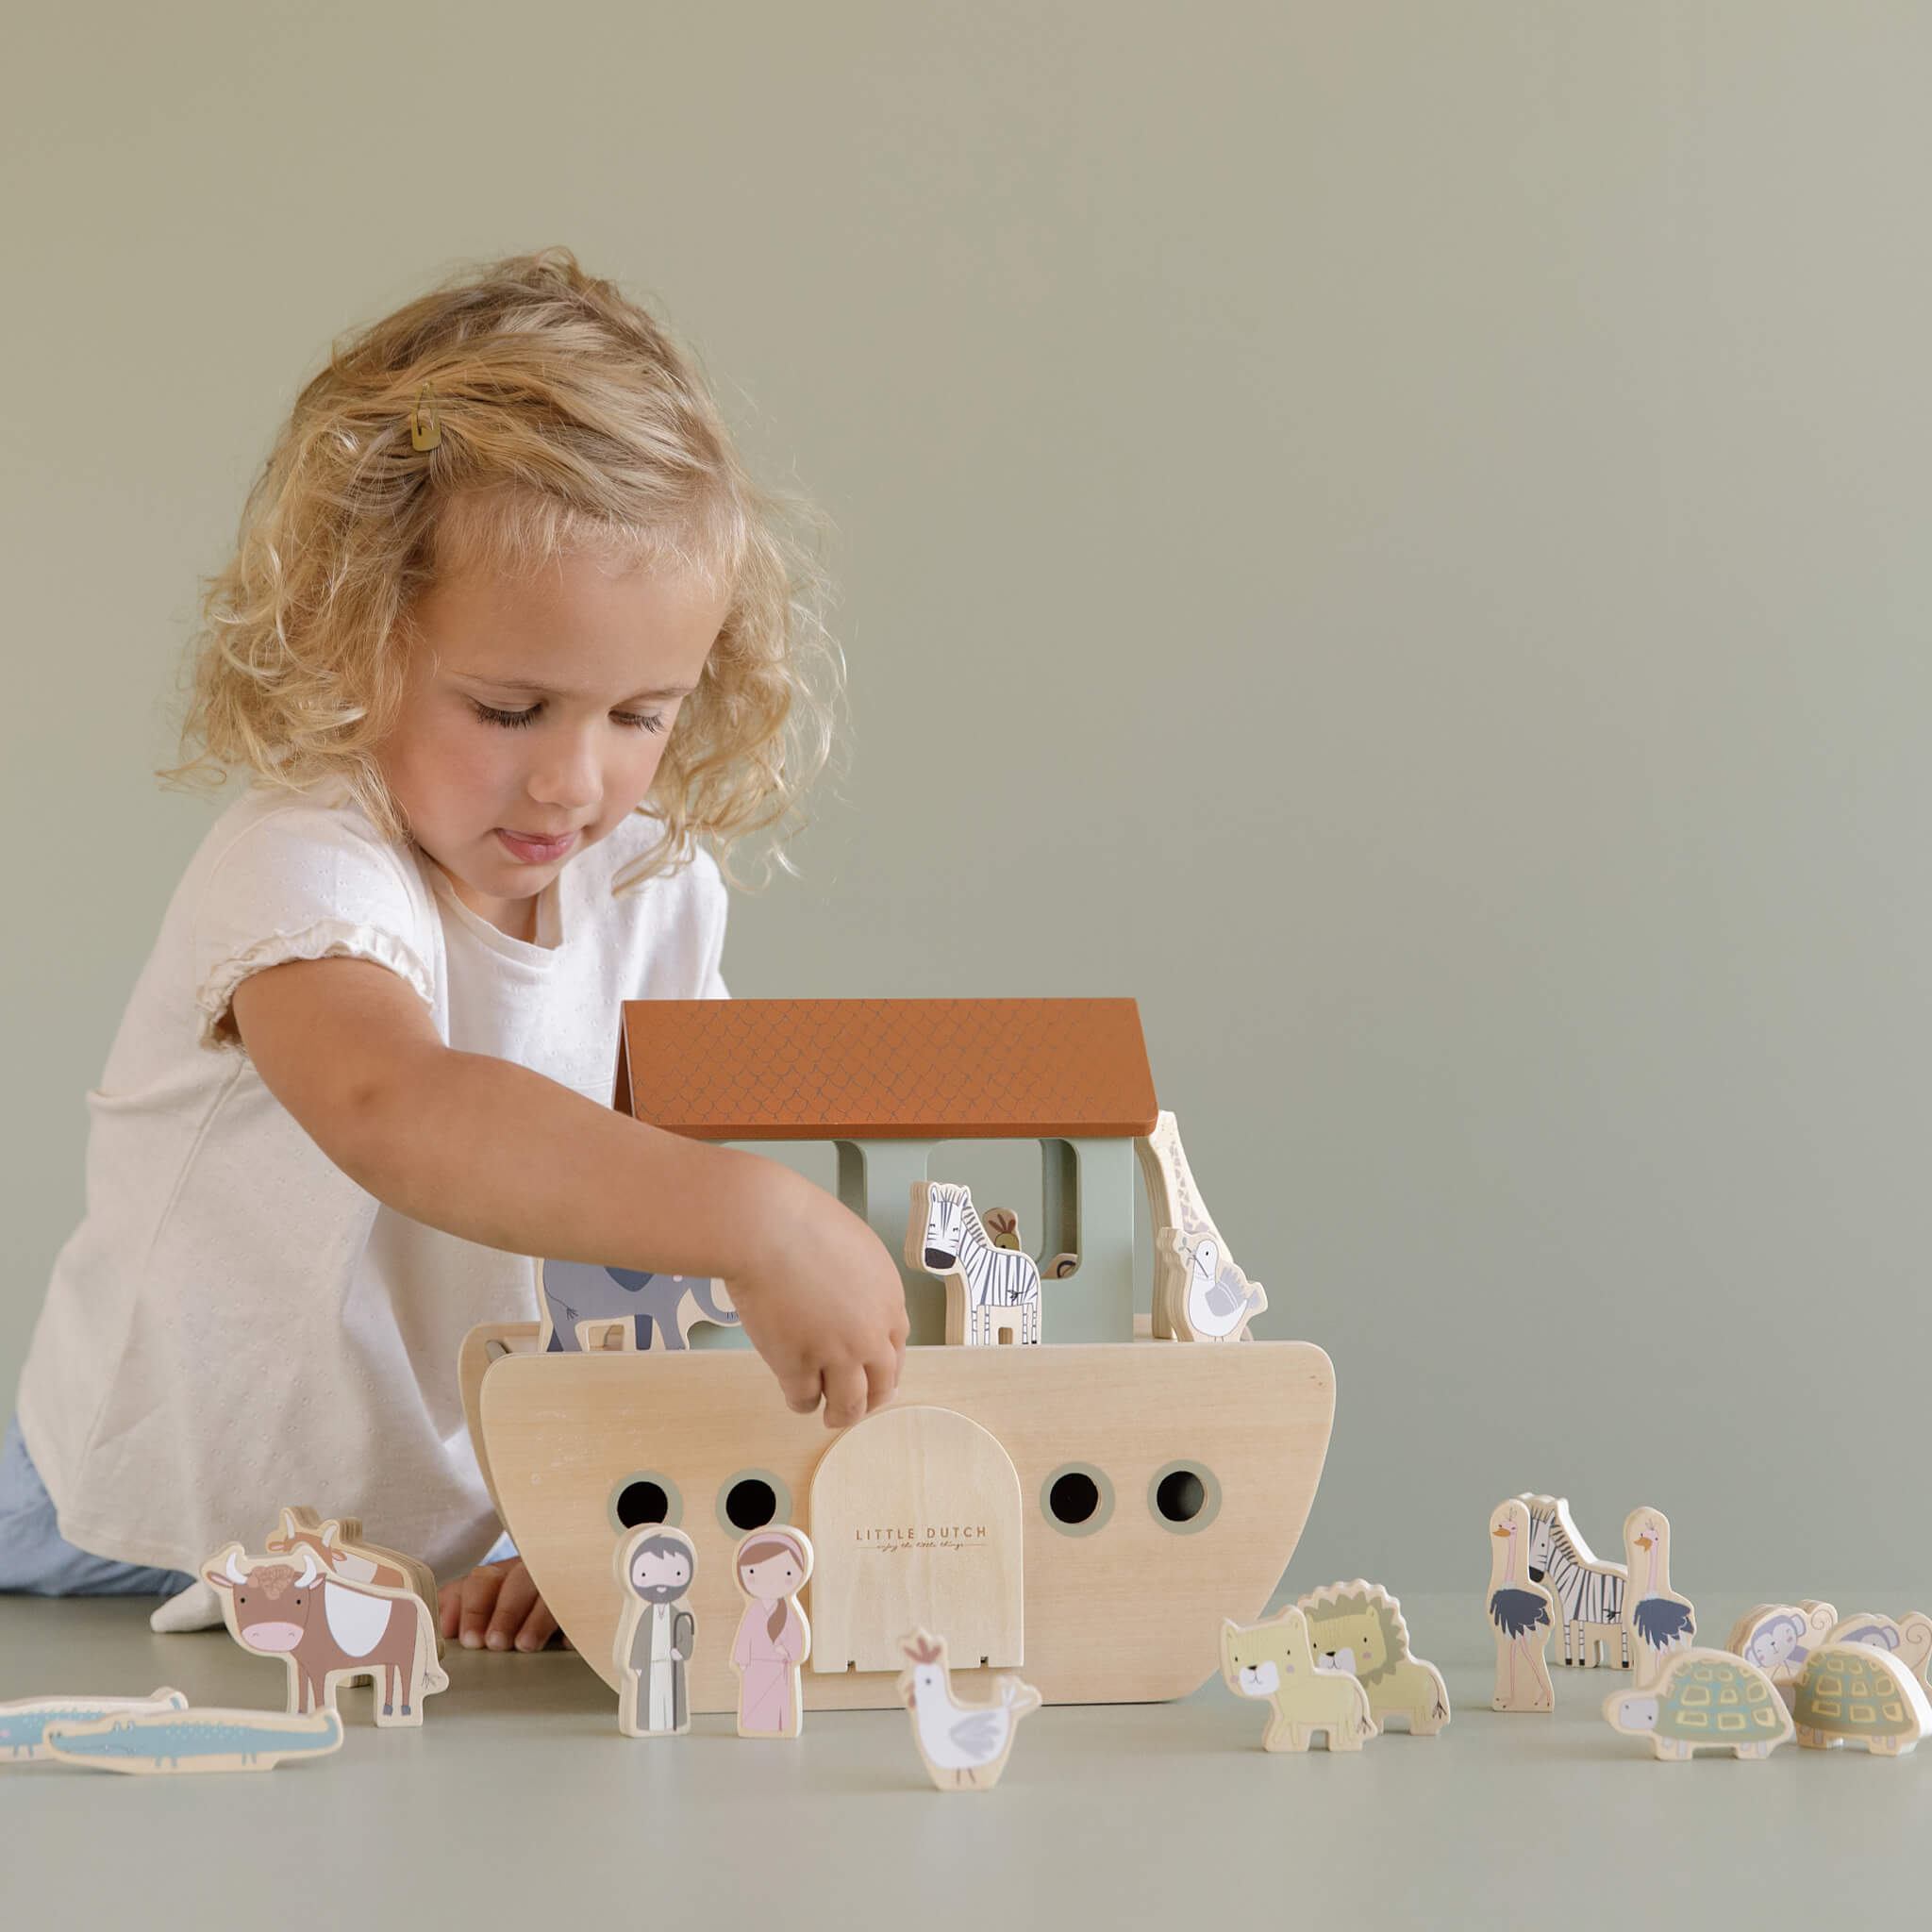 Girl with Wooden Noahs Ark Playset Toy